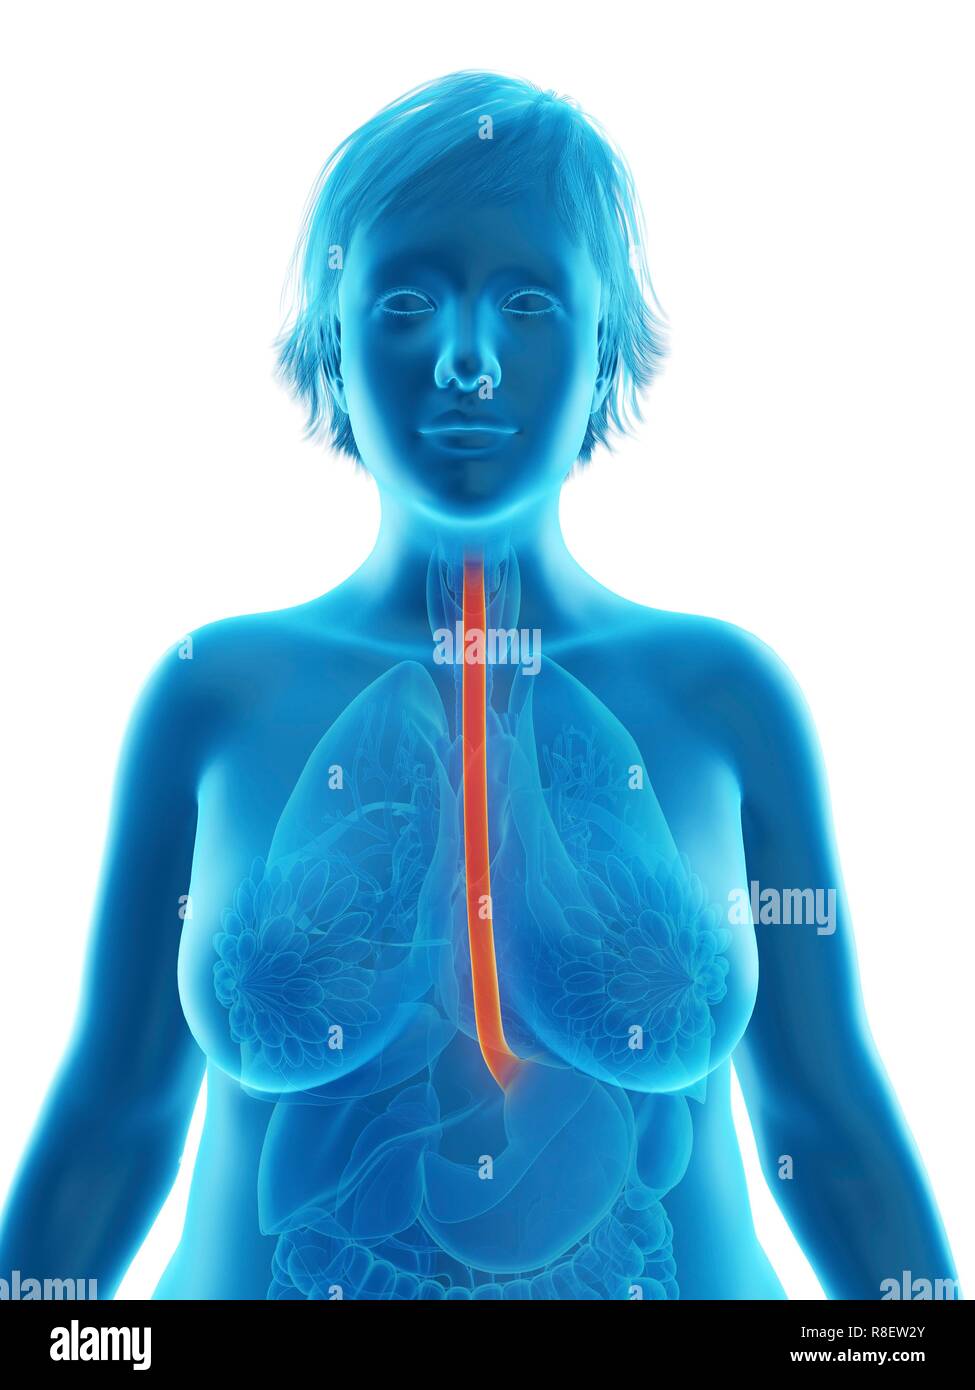 Illustration of an obese woman's esophagus. Stock Photo